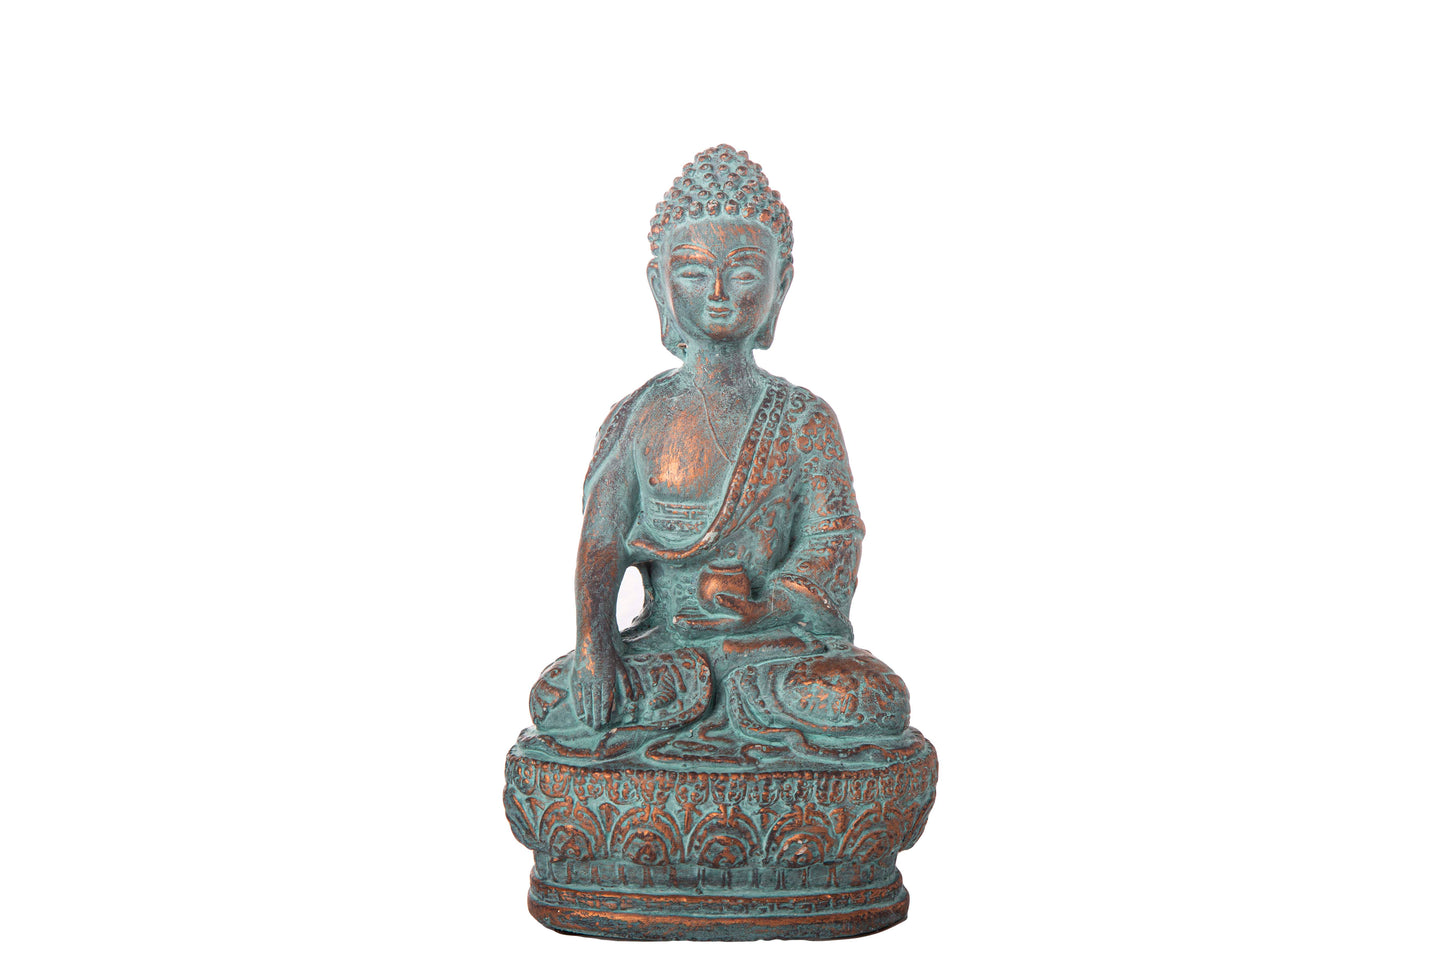 9" Cement Lord Meditating Buddha Figurine in Dhyana Mudra Position